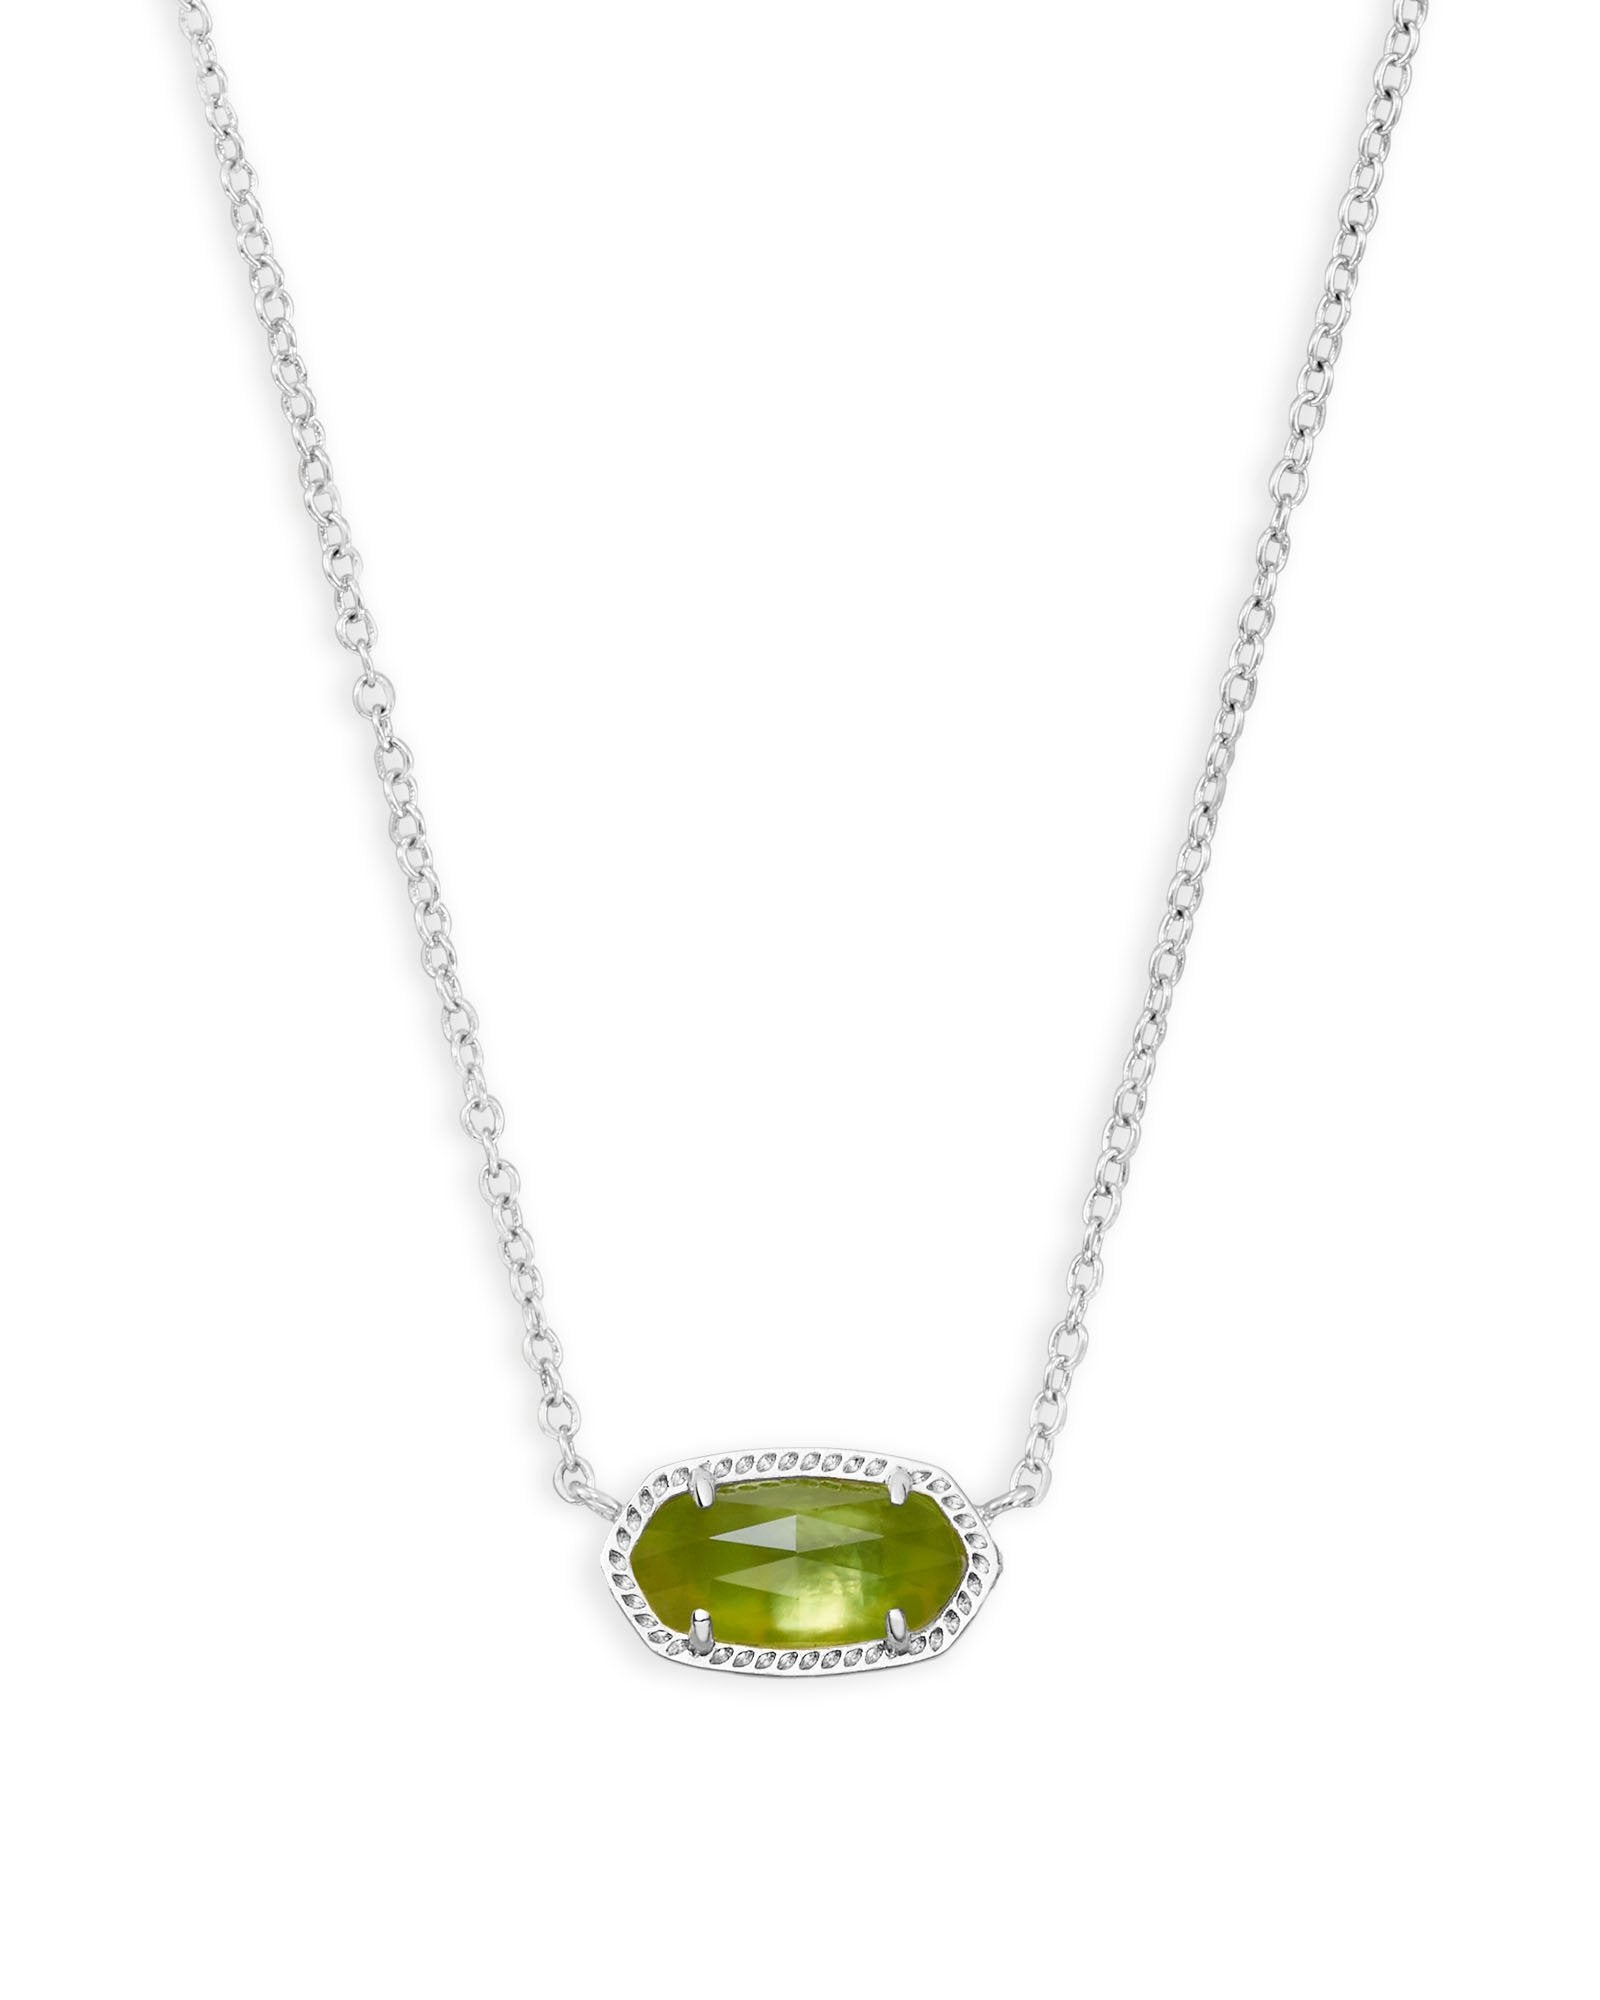 Elisa August Peridot Illusion Necklace Front View